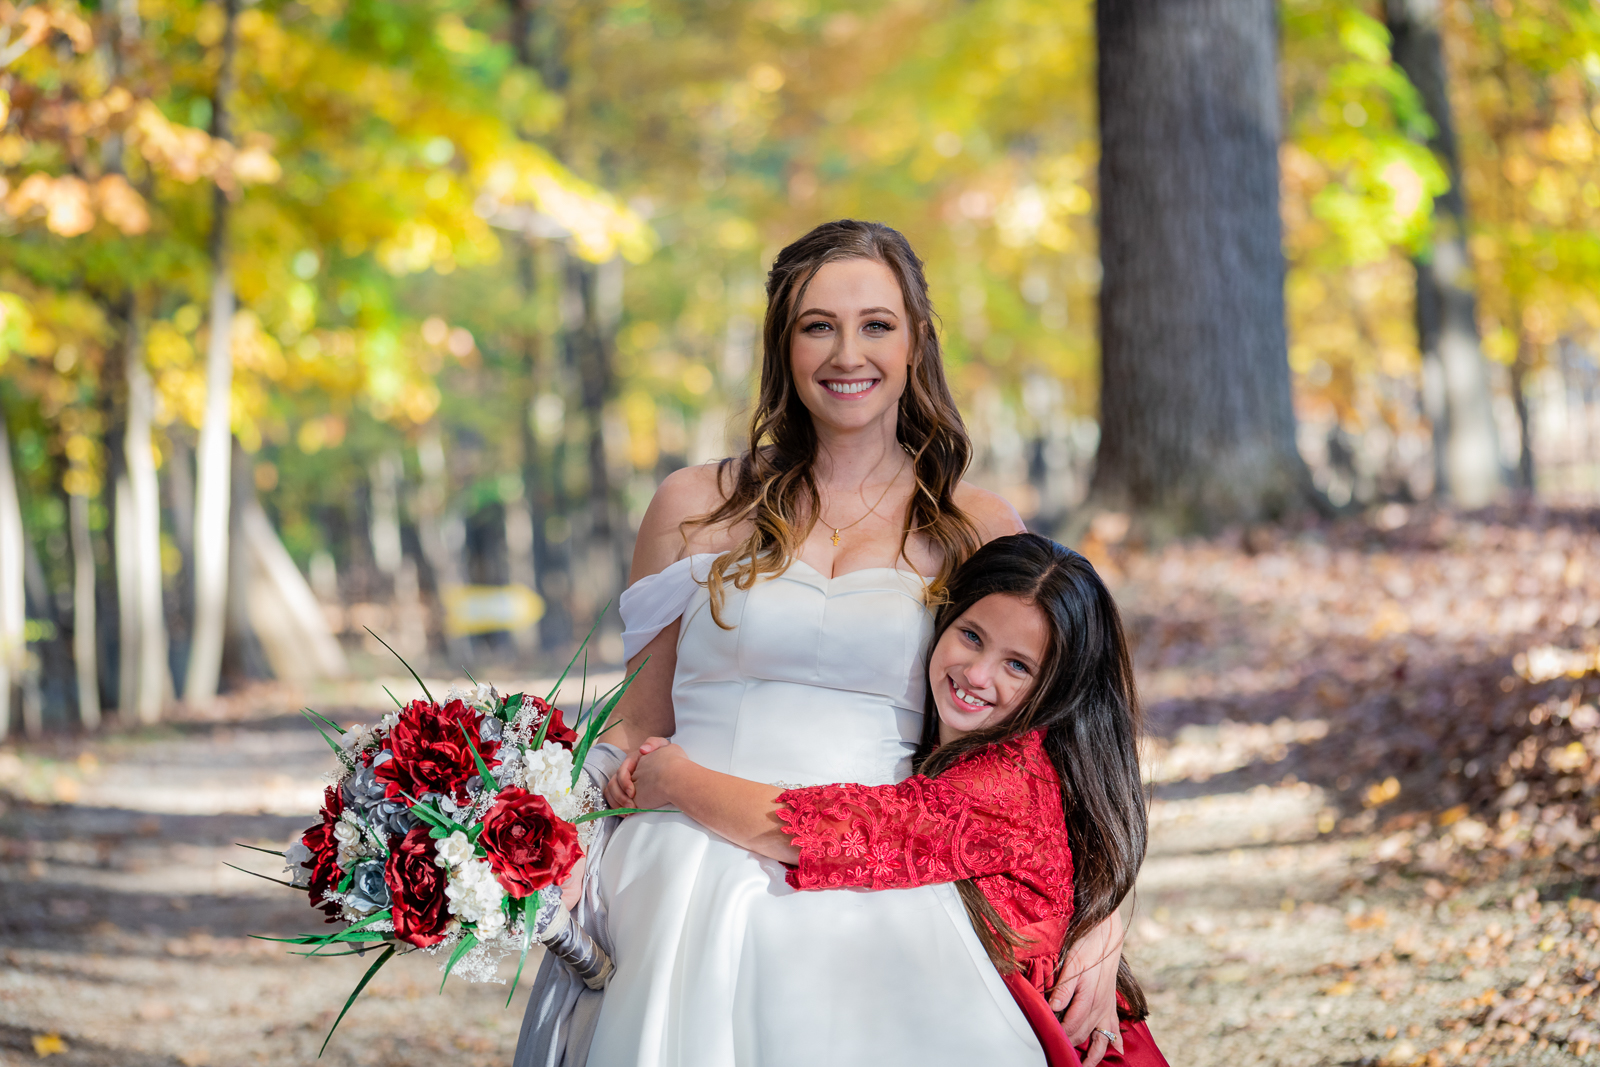 Bride with flower girl, family portrait, fall wedding, outdoor wedding ceremony at German Central Organization